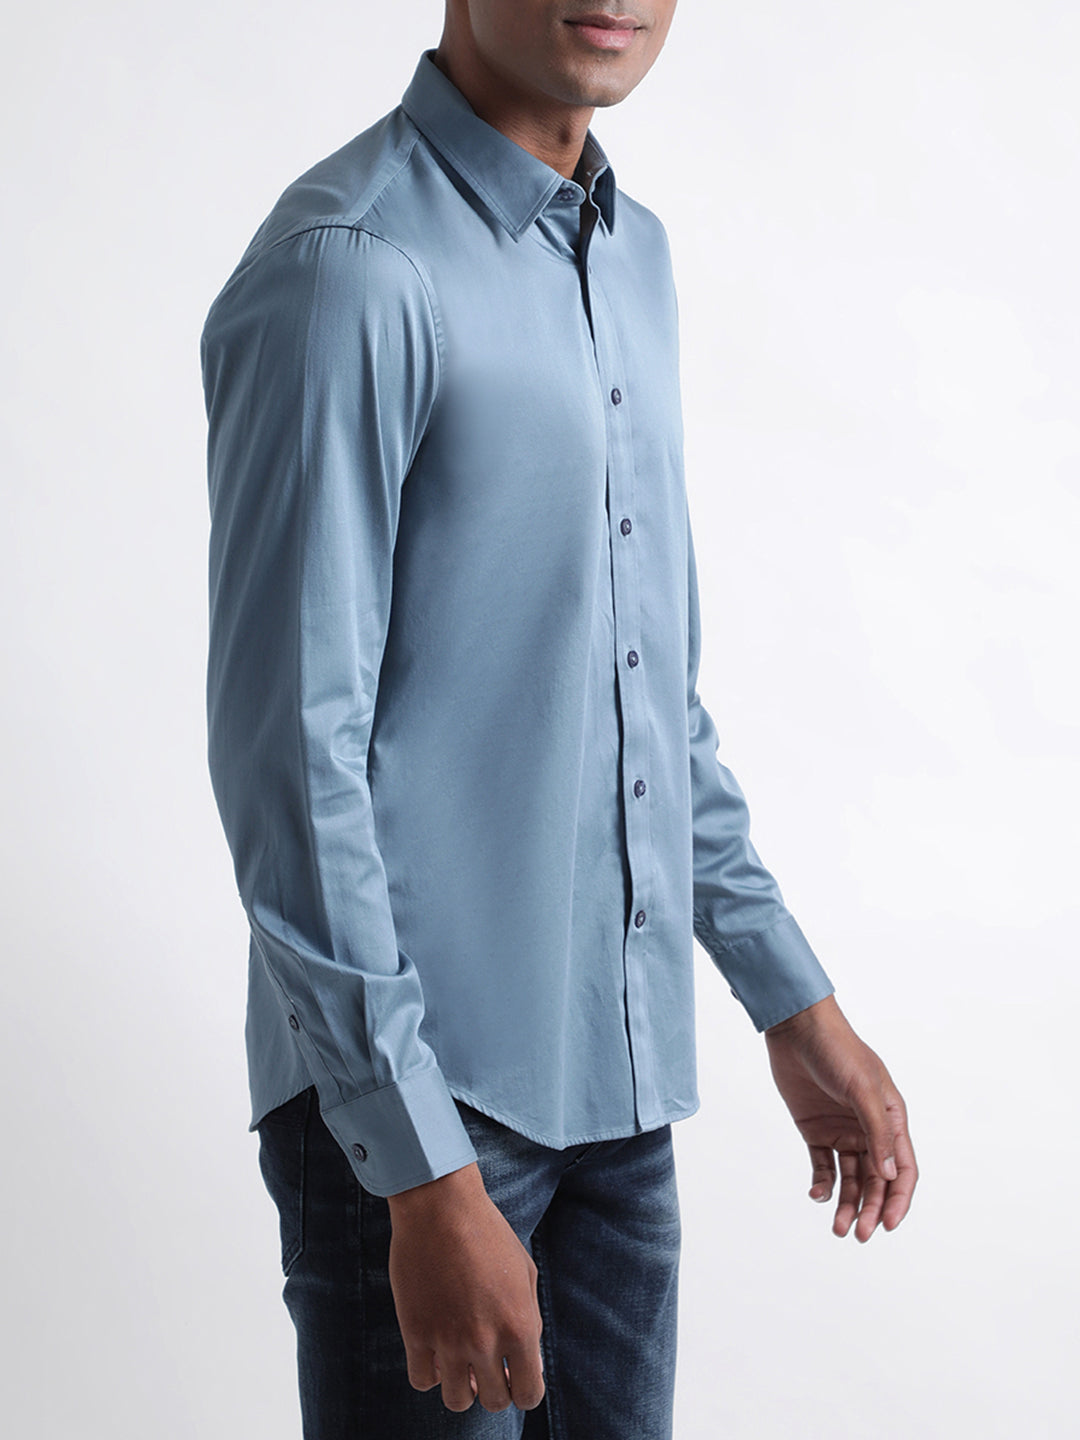 Iconic Men Teal Solid Collar Shirt